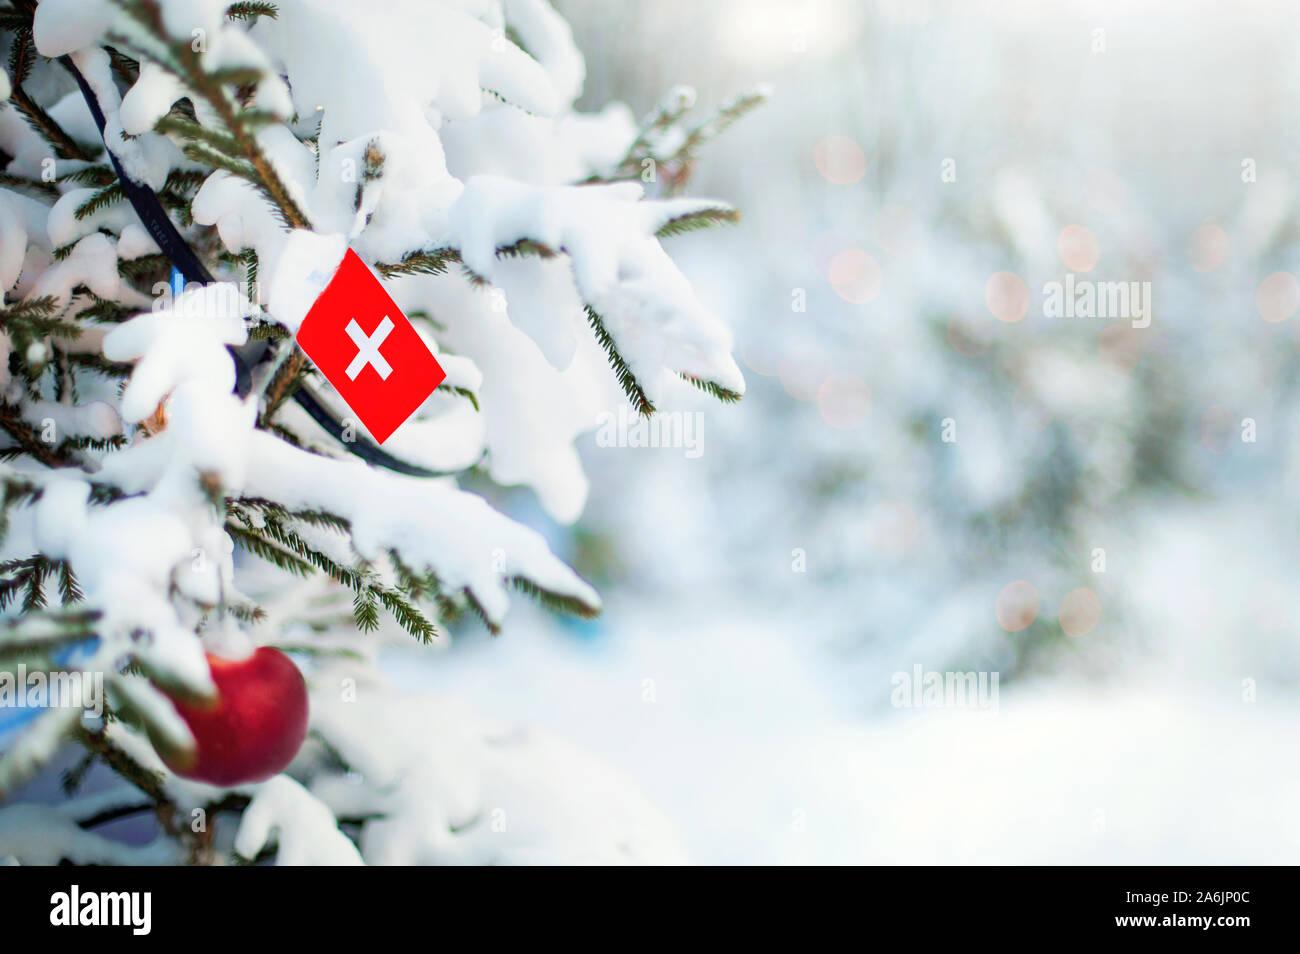 Christmas Switzerland Xmas Tree Covered With Snow Decorations